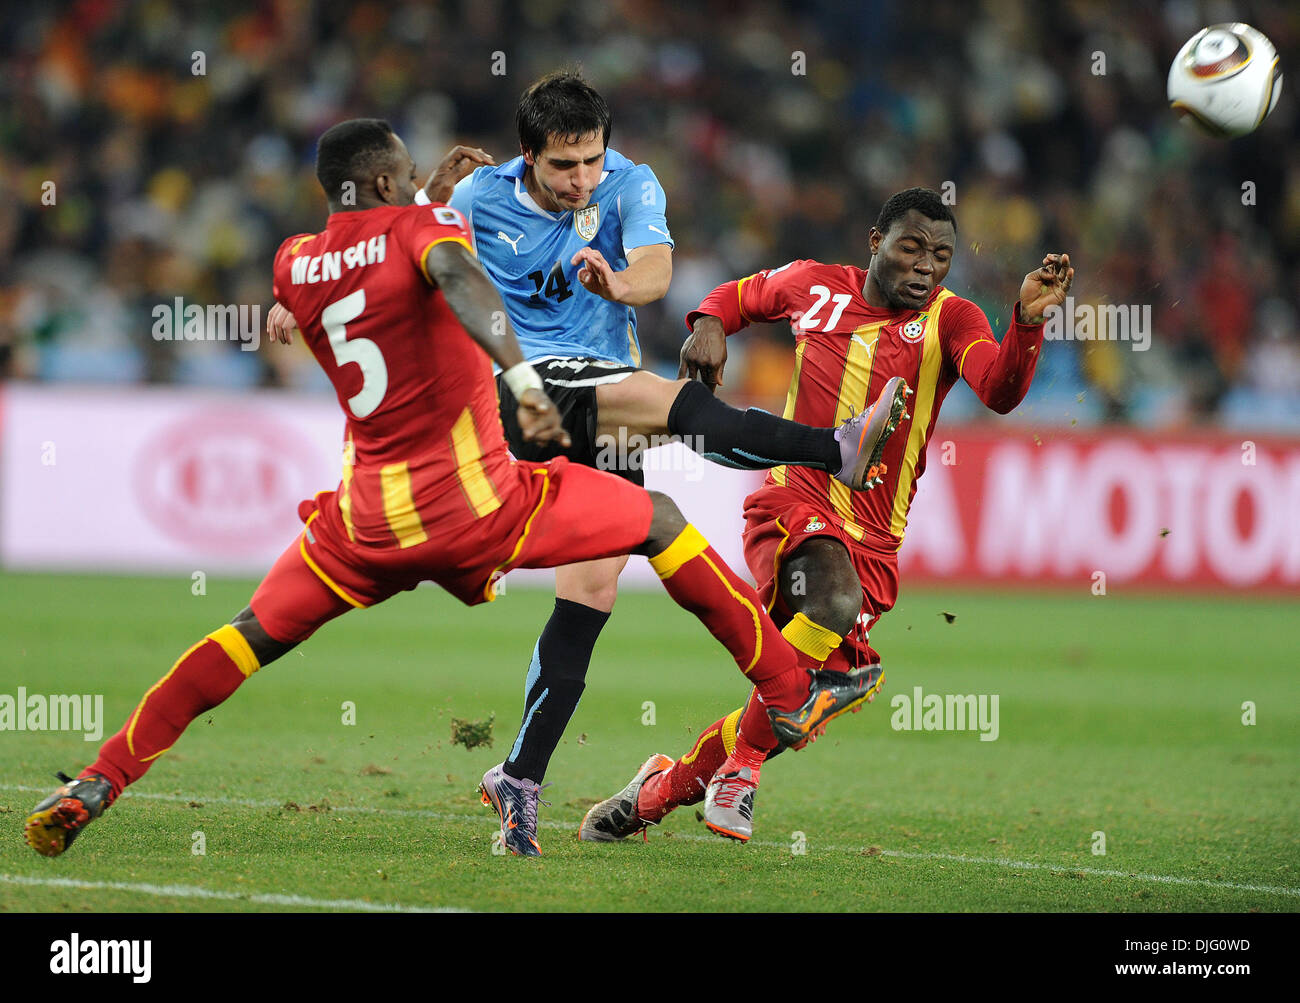 July 02, 2010 - Johannesburg, South Africa - Nicolas Lodeiro of Uruguay fights for the ball with John Mensah and Kwadwo Asamoah of Ghana during the 2010 FIFA World Cup Quarter Final soccer match between Uruguay and Ghana at Soccer City Stadium on June 02, 2010 in Johannesburg, South Africa. (Credit Image: © Luca Ghidoni/ZUMApress.com) Stock Photo